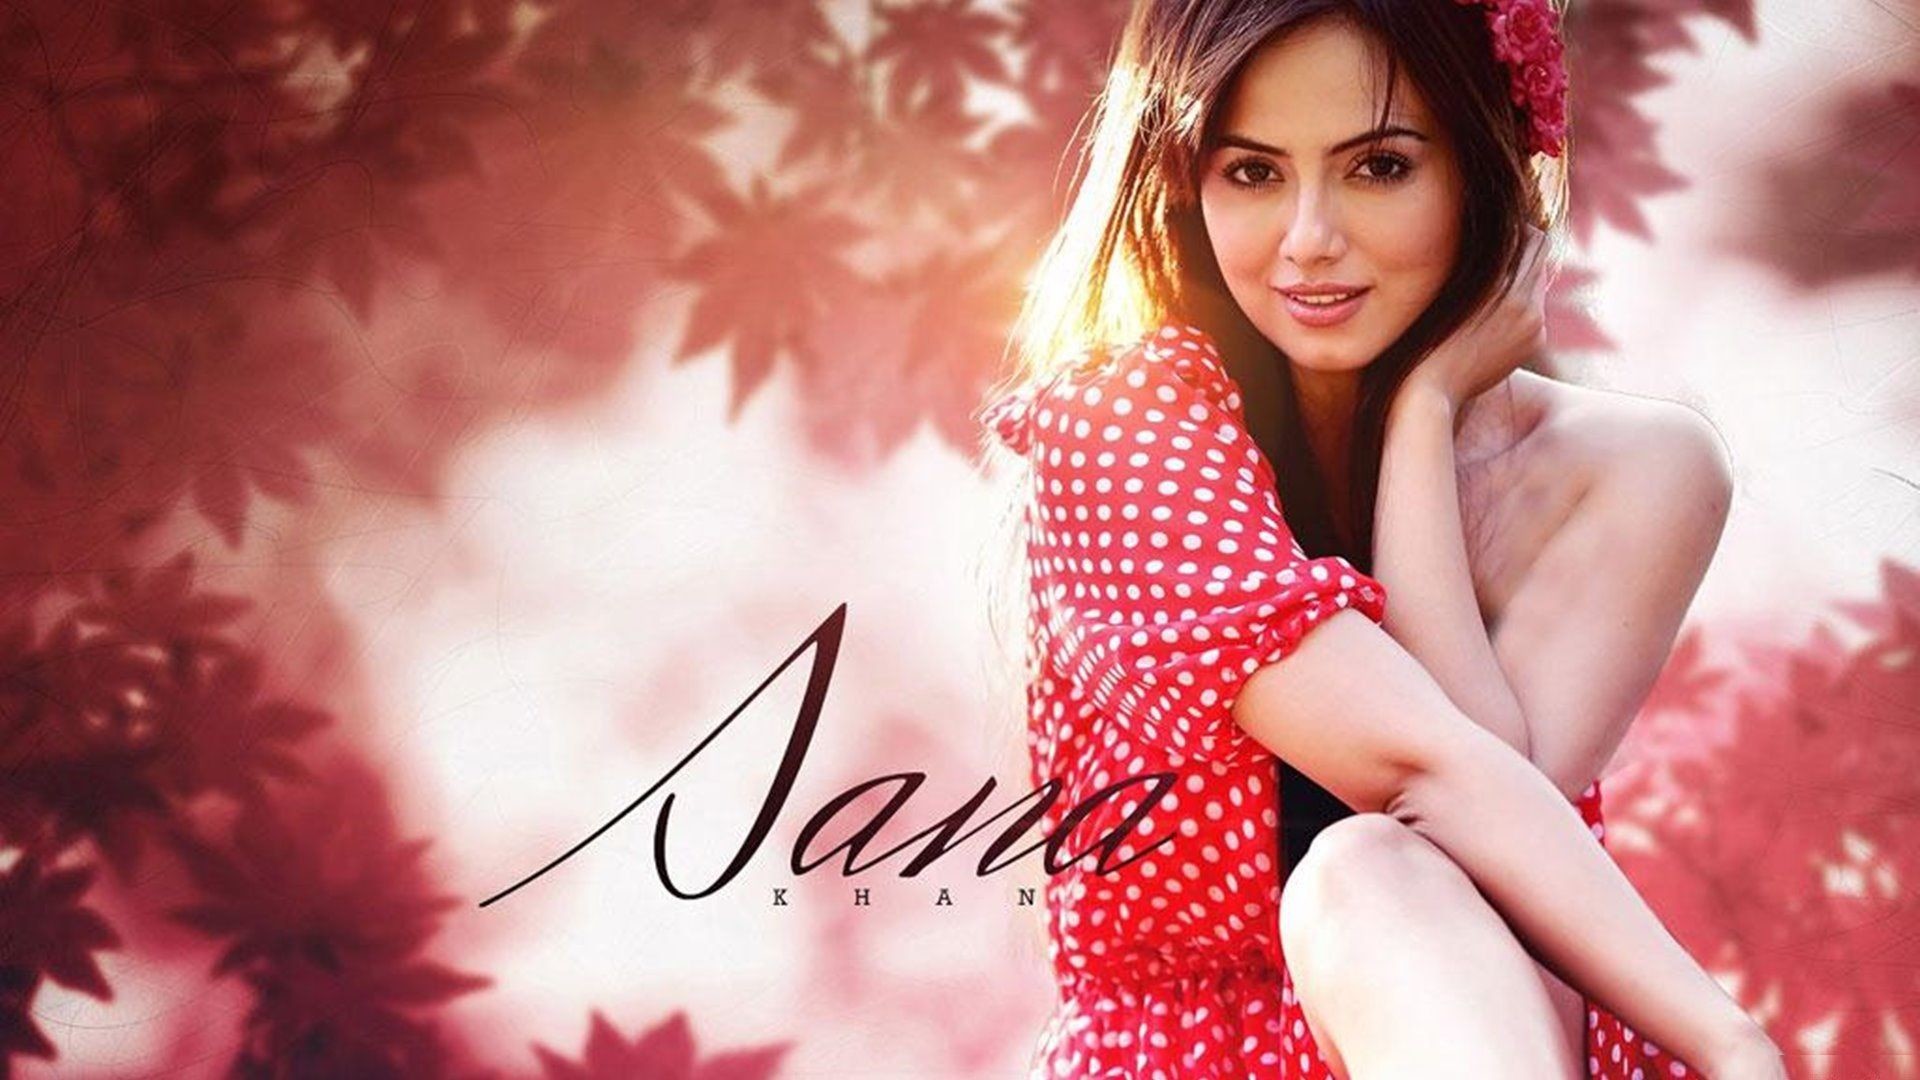 1920x1080 Sana Khan Hot HD Wallpapers for Desktop and Laptop - for more please visit  etcfn.